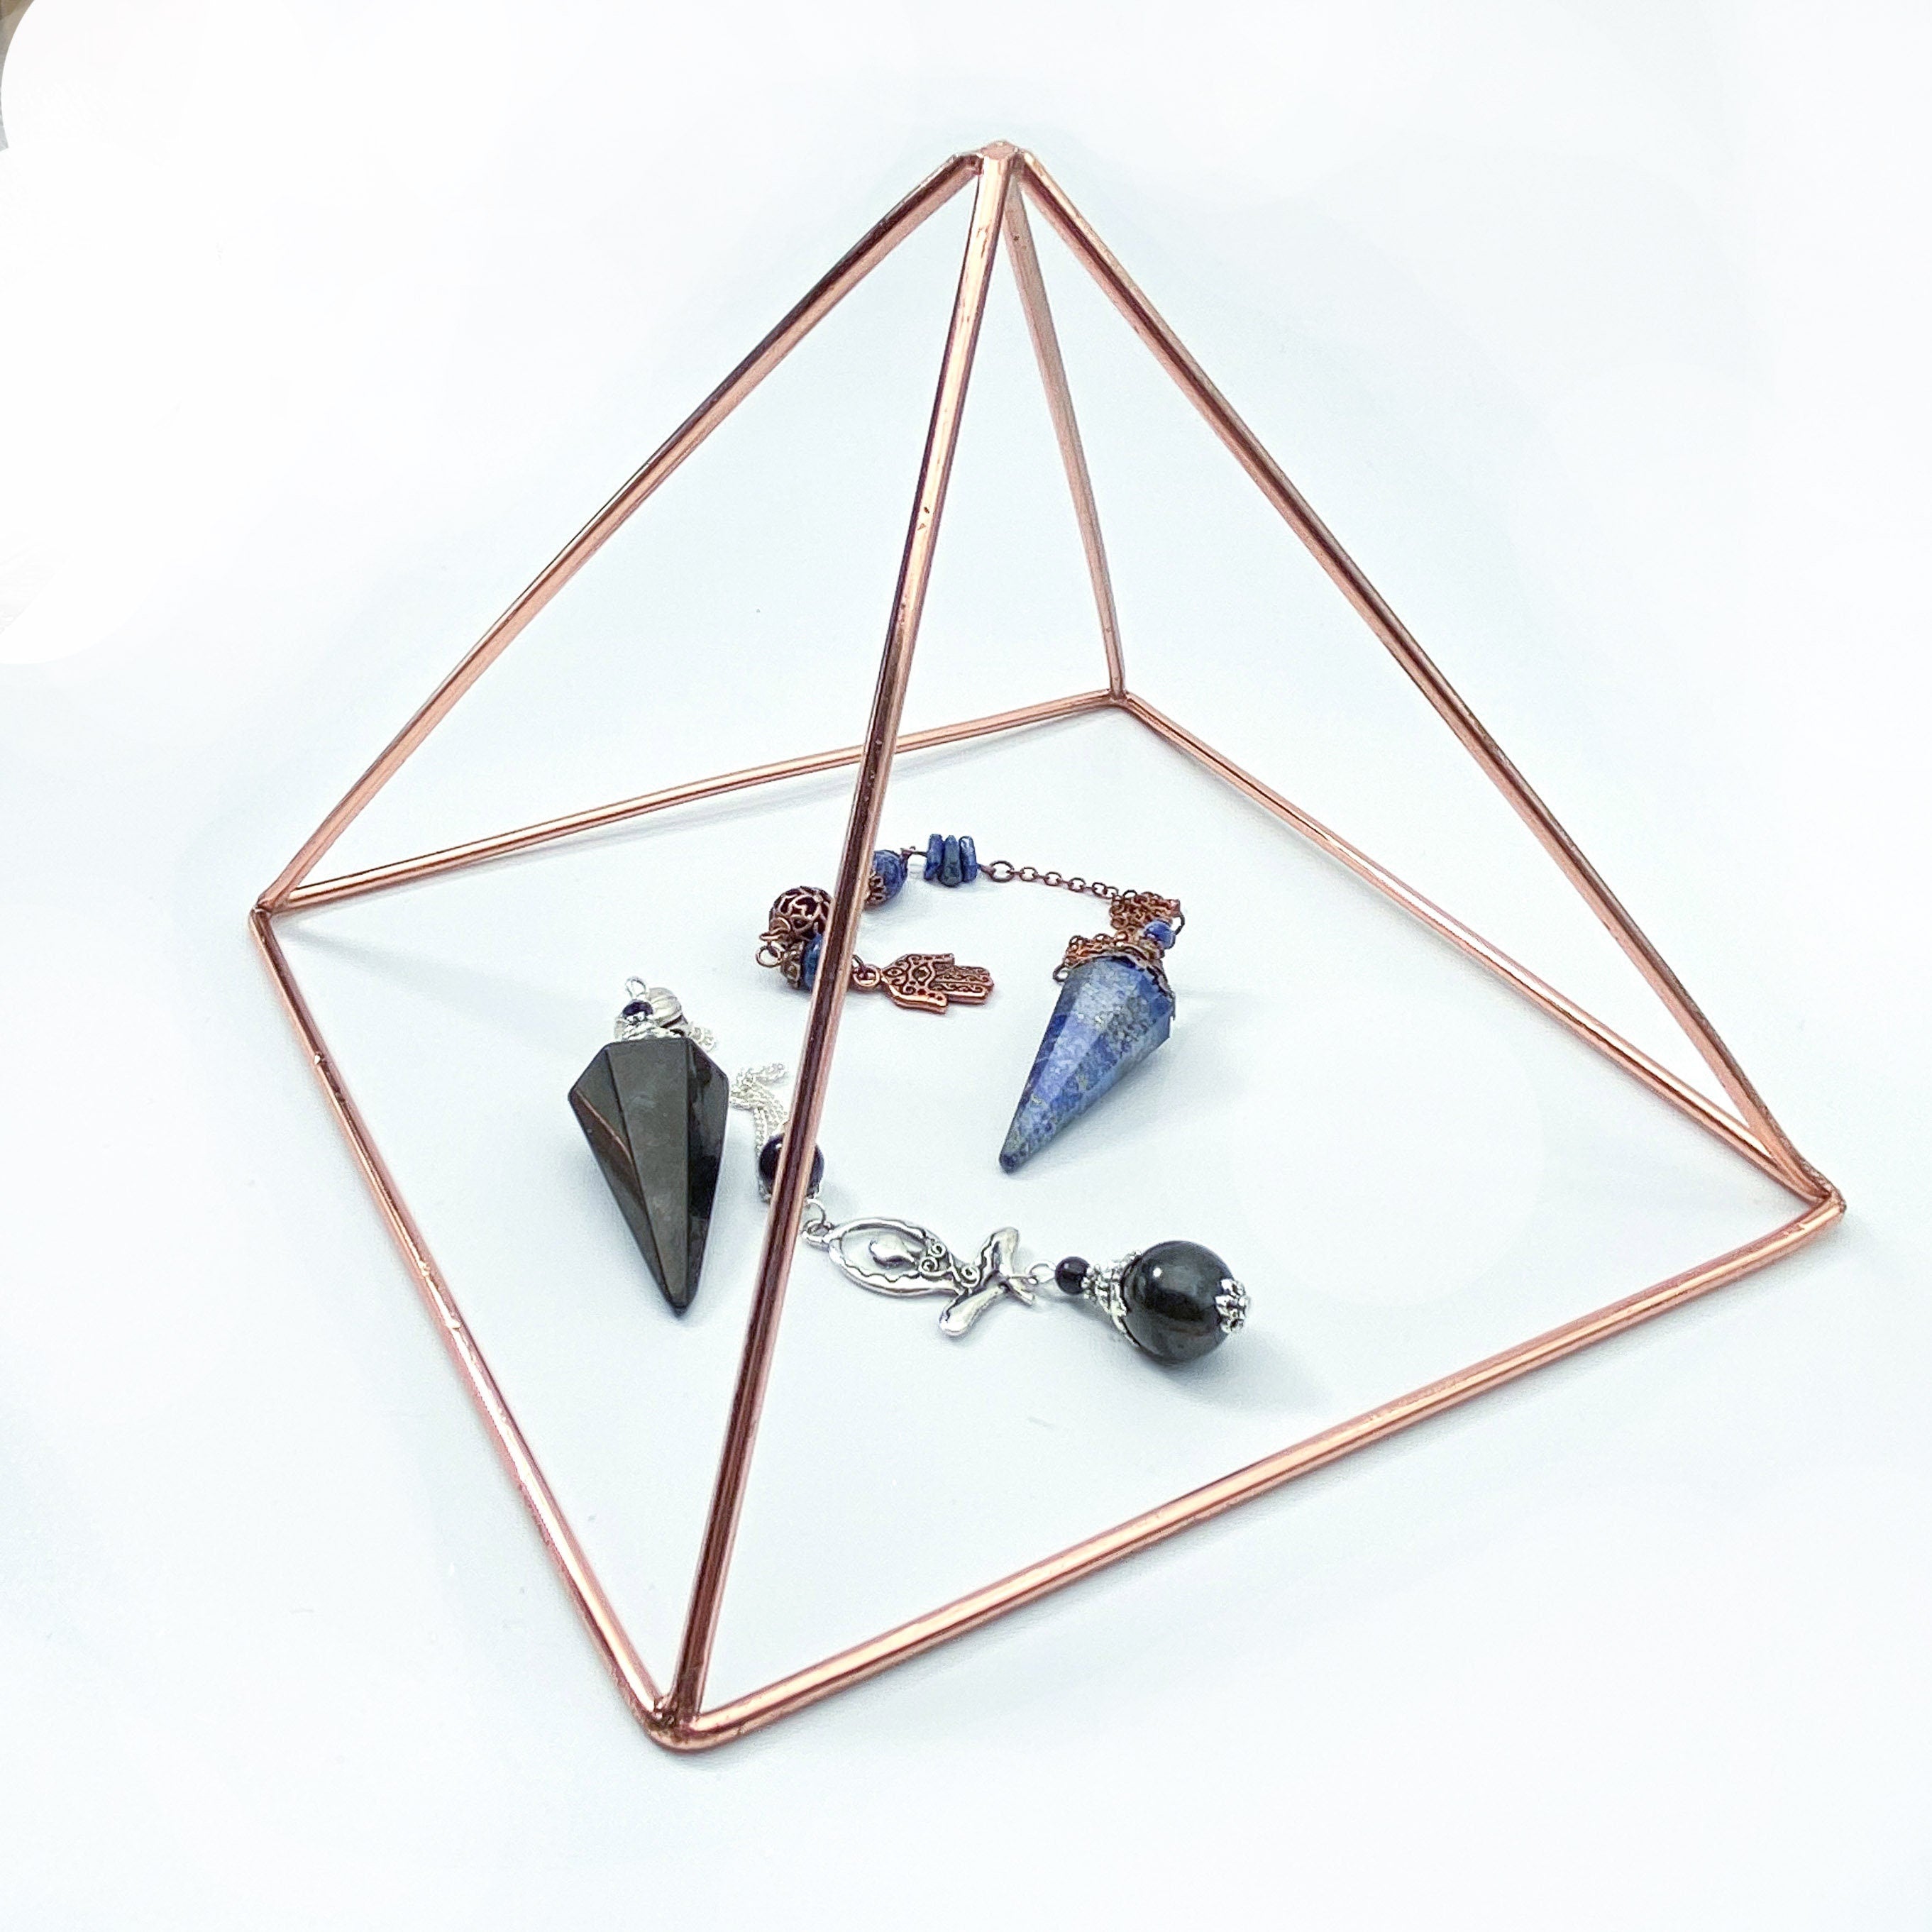 Copper Energizing Pyramid 6, Cleanse, Recharge and Restore